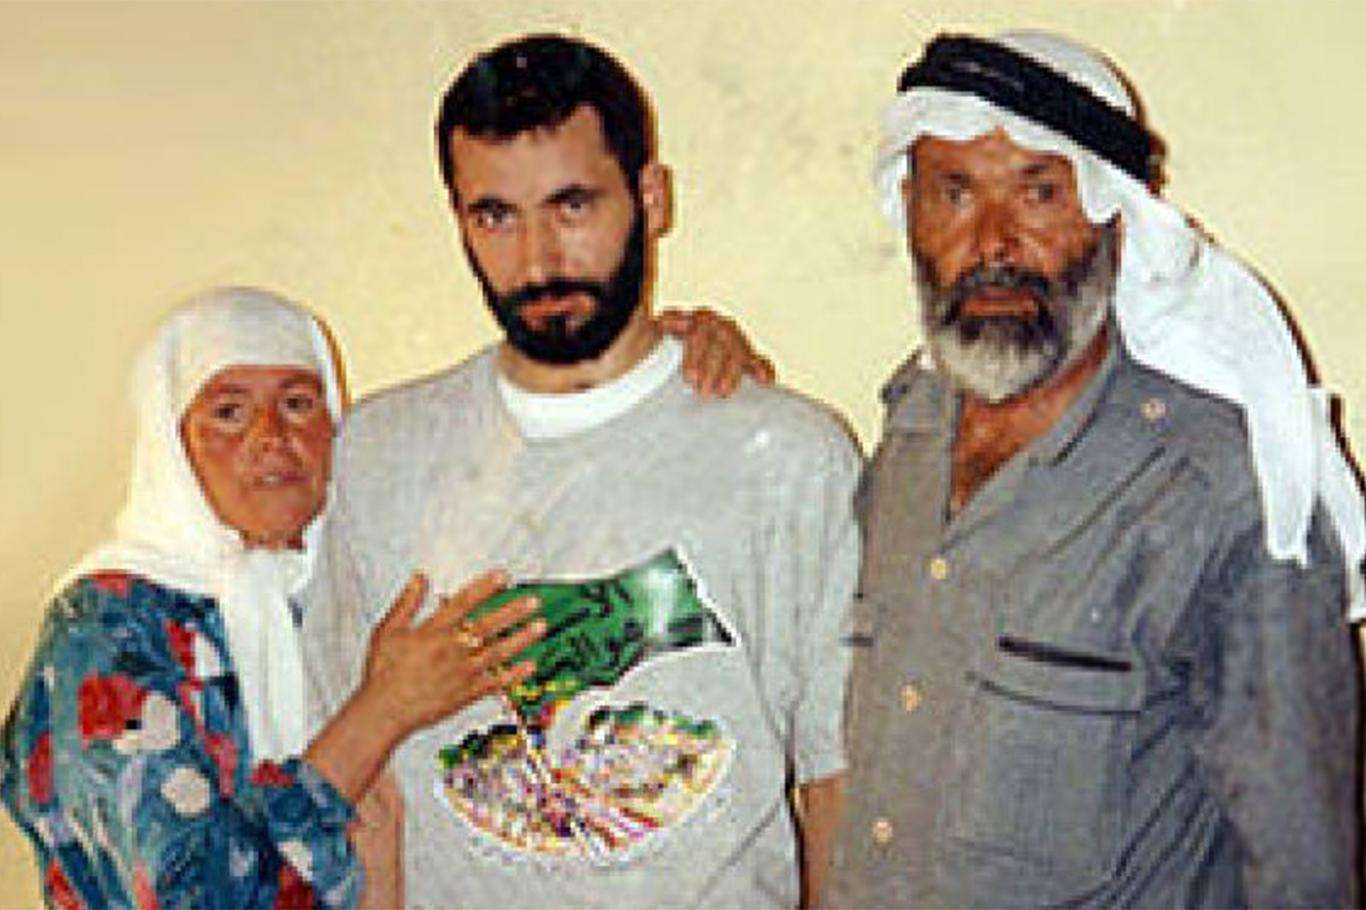 Today is the 26th anniversary of the martyrdom of Yahya Ayyash